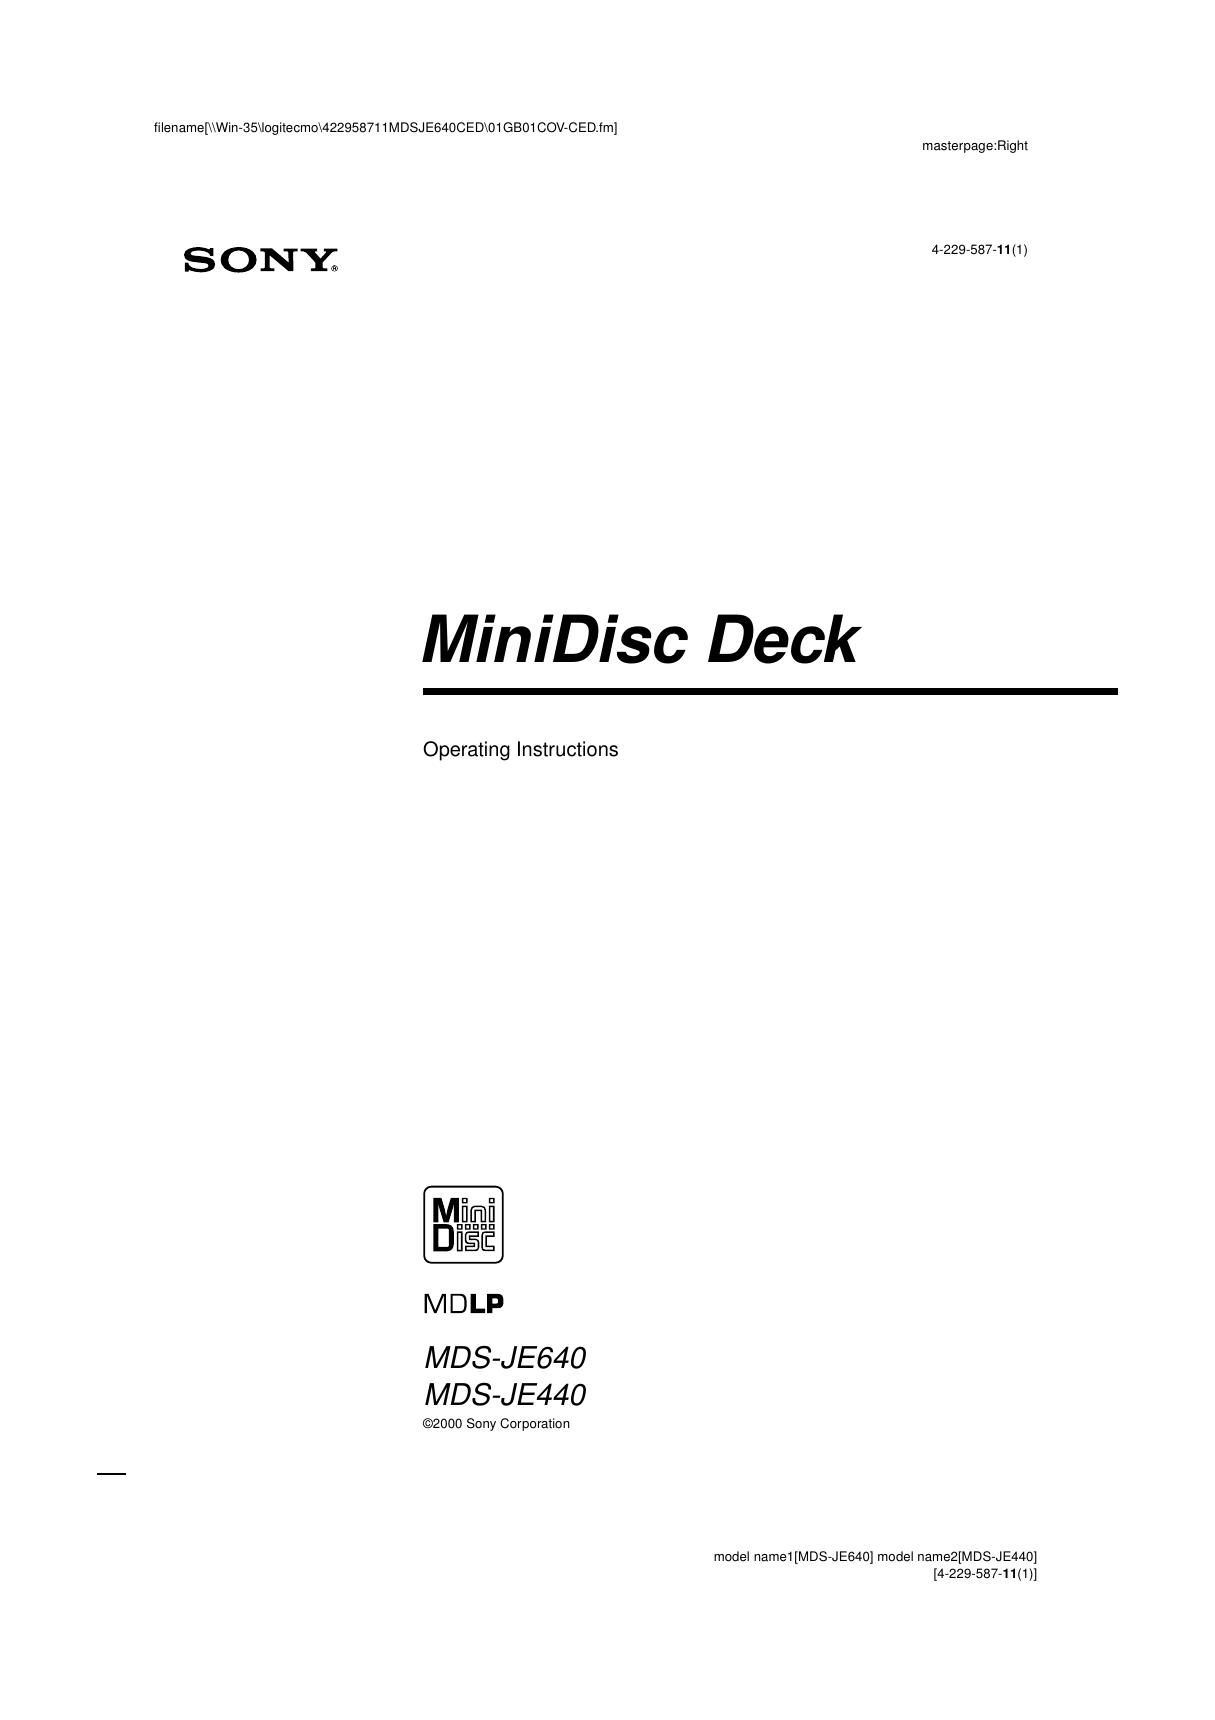 sony mds je 640 owners manual